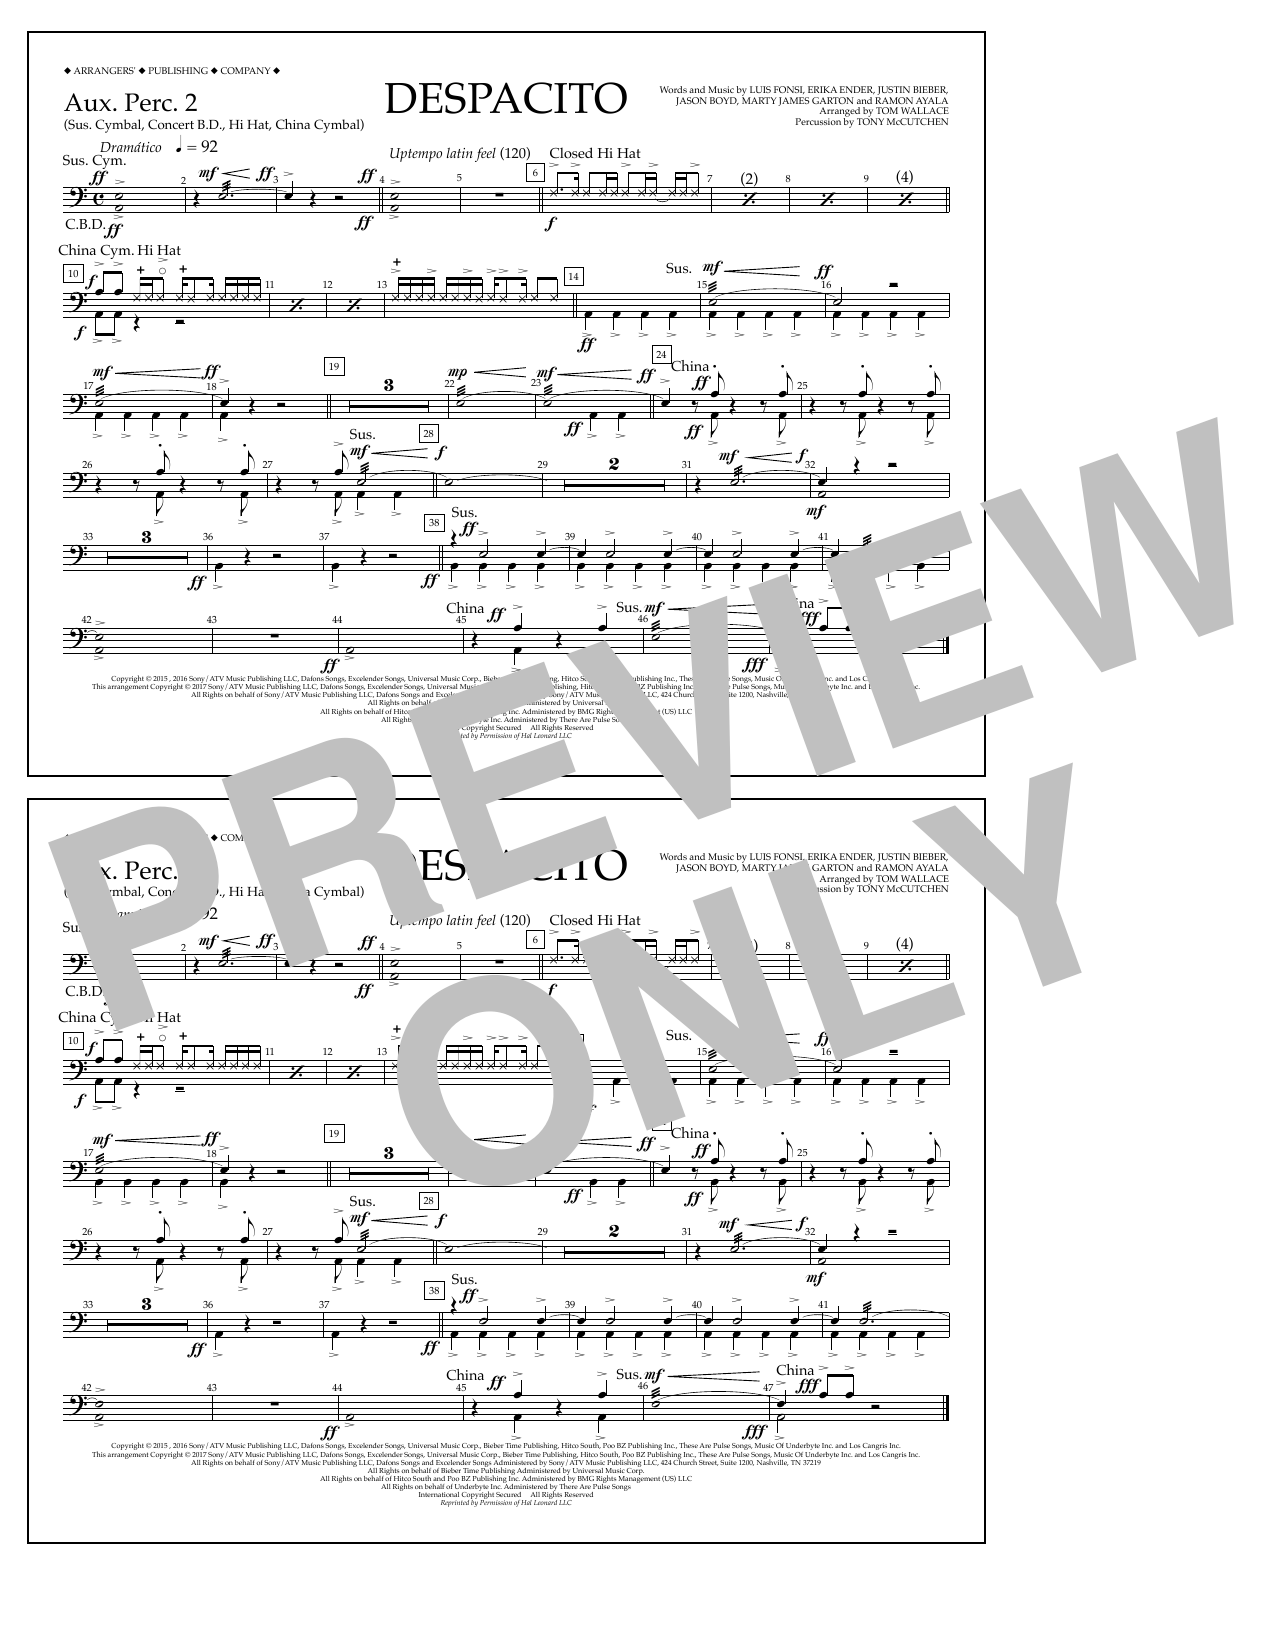 Download Tom Wallace Despacito - Aux. Perc. 2 Sheet Music